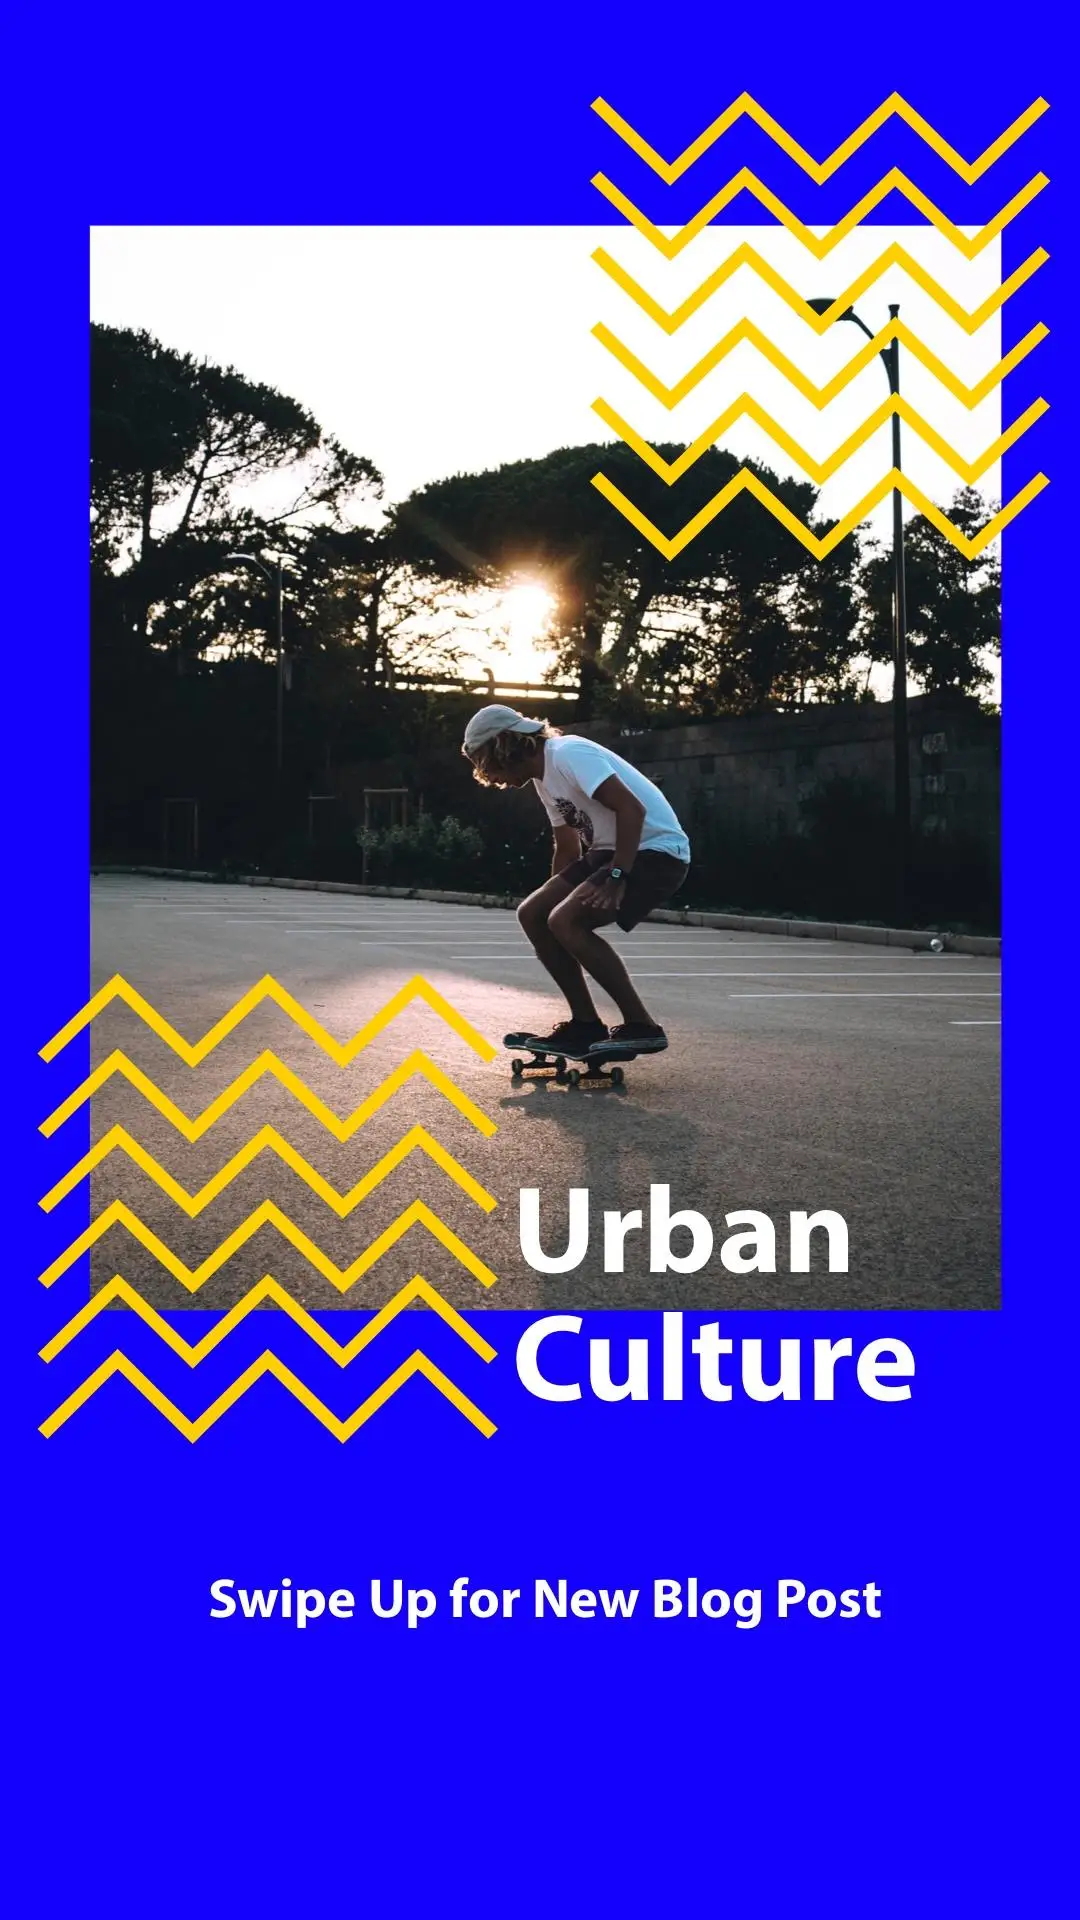 Blue and Yellow Urban Culture Instagram Story